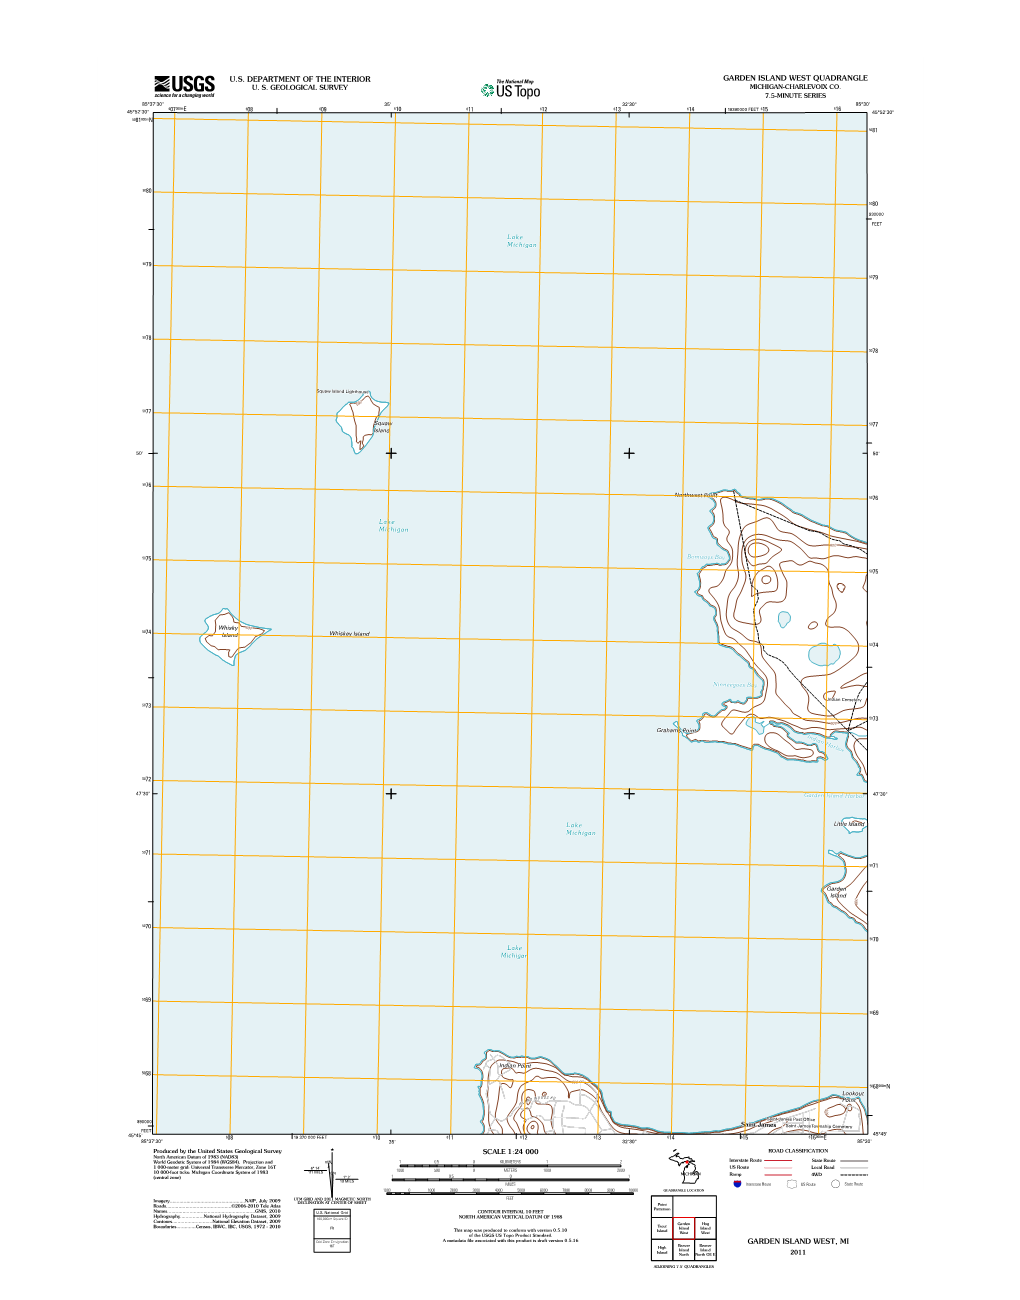 USGS 7.5-Minute Image Map for Garden Island West, Michigan